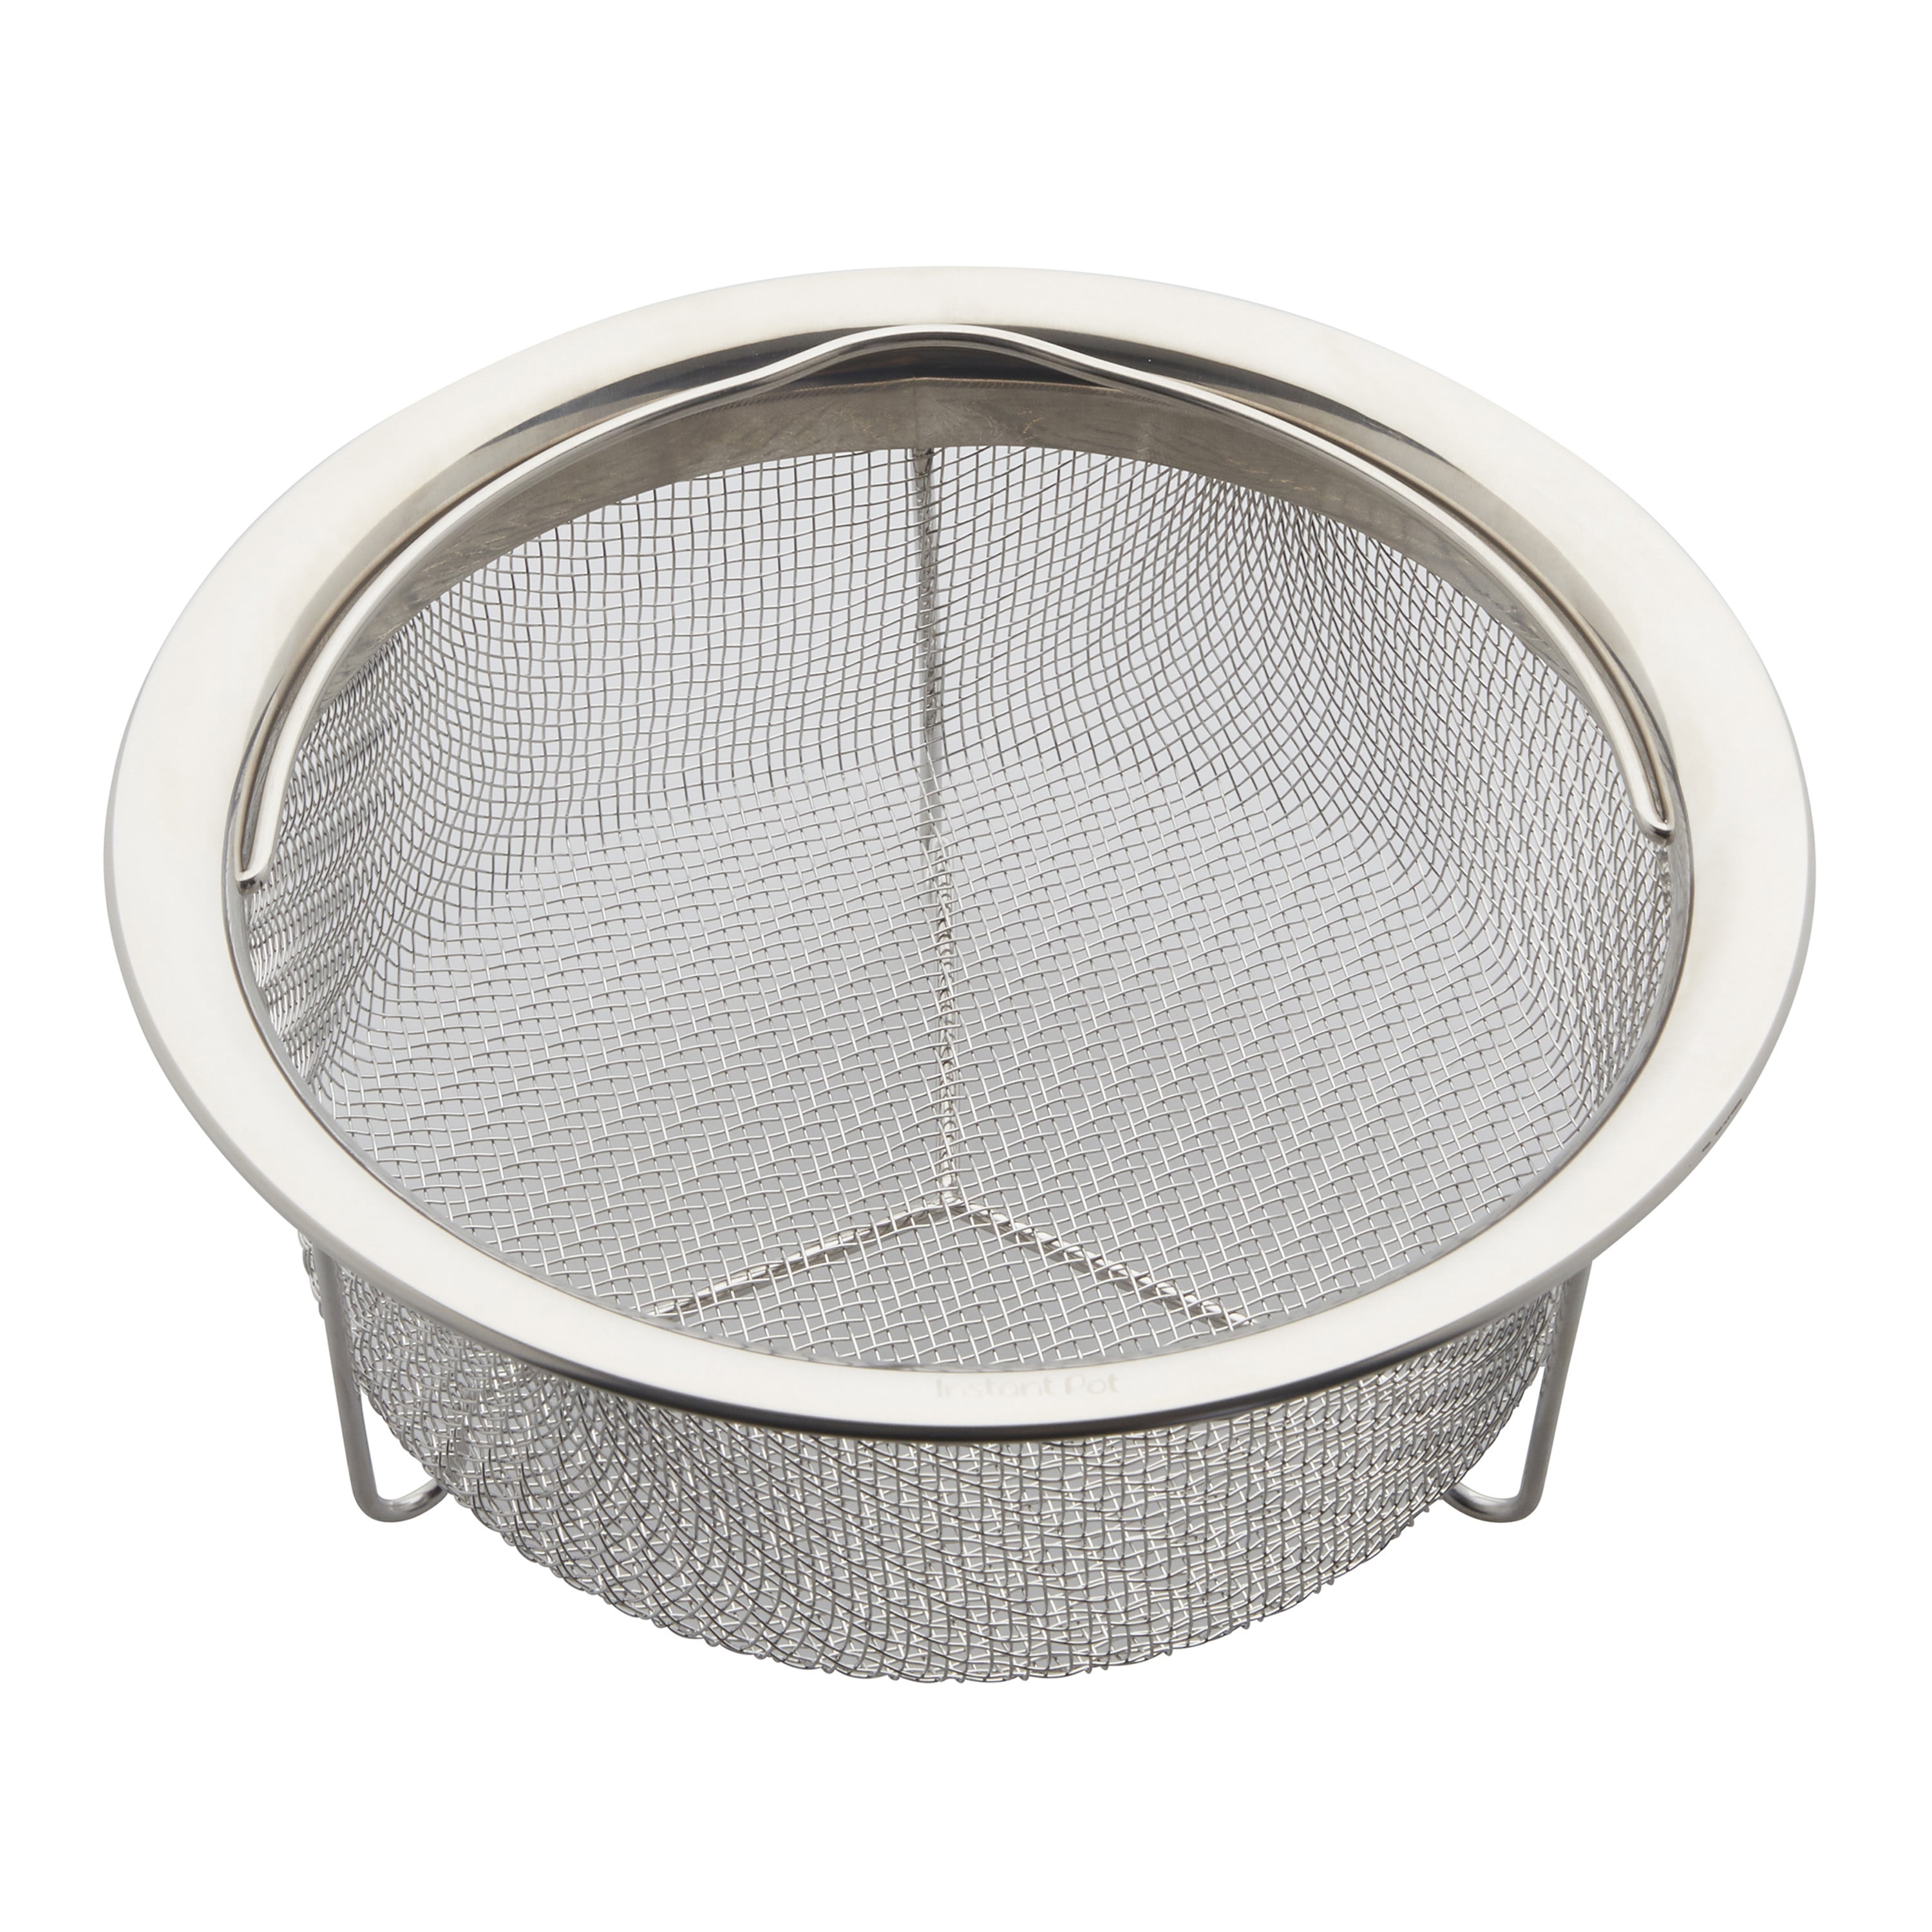 USD 25.44] Carote Home Single Circular Steamer Steamer Basket Drawer Steamer  Cage Non-Only Open Fire - Wholesale from China online shopping